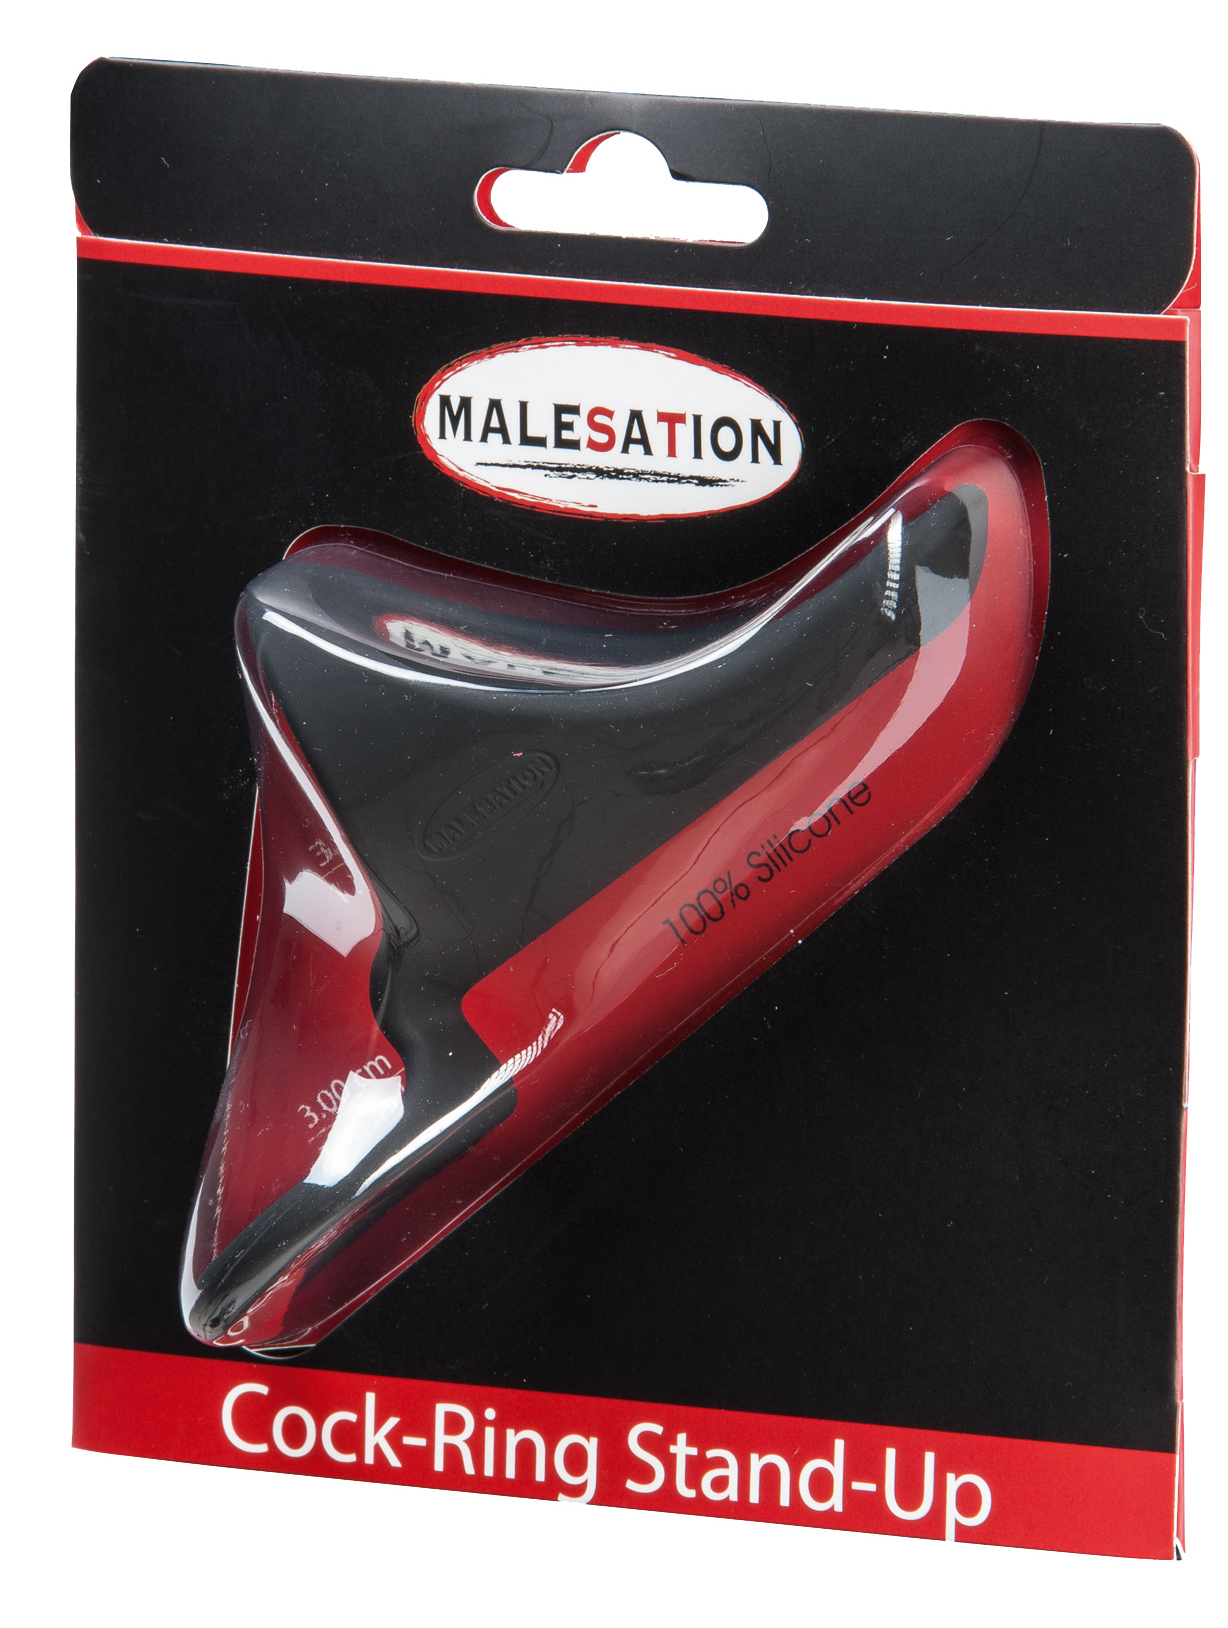 MALESATION Cock-Ring Stand-Up